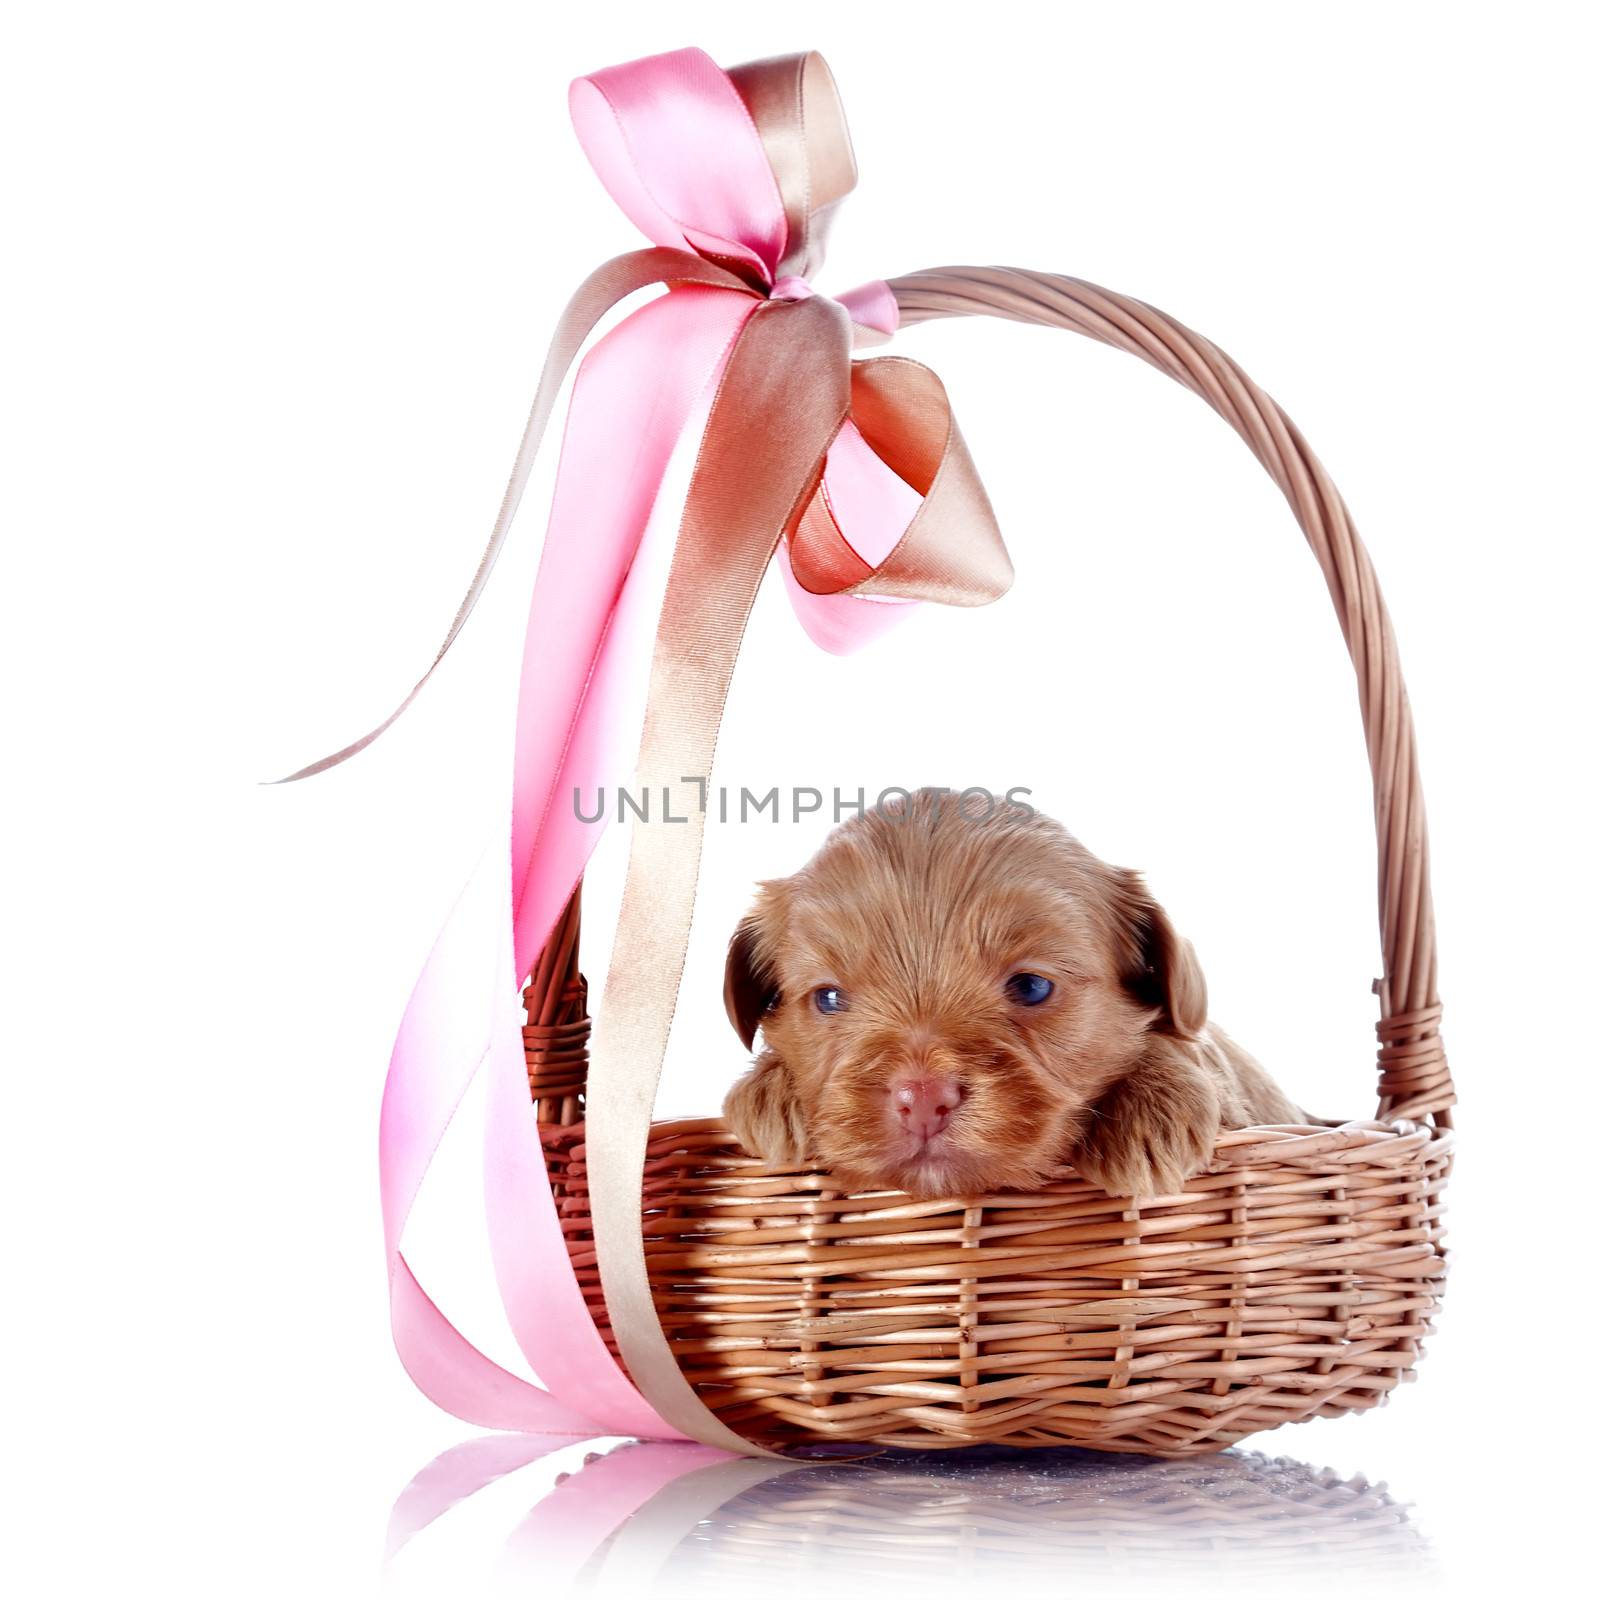 Puppy in a wattled basket with a bow. Puppy of a decorative doggie. Decorative dog. Puppy of the Petersburg orchid on a white background